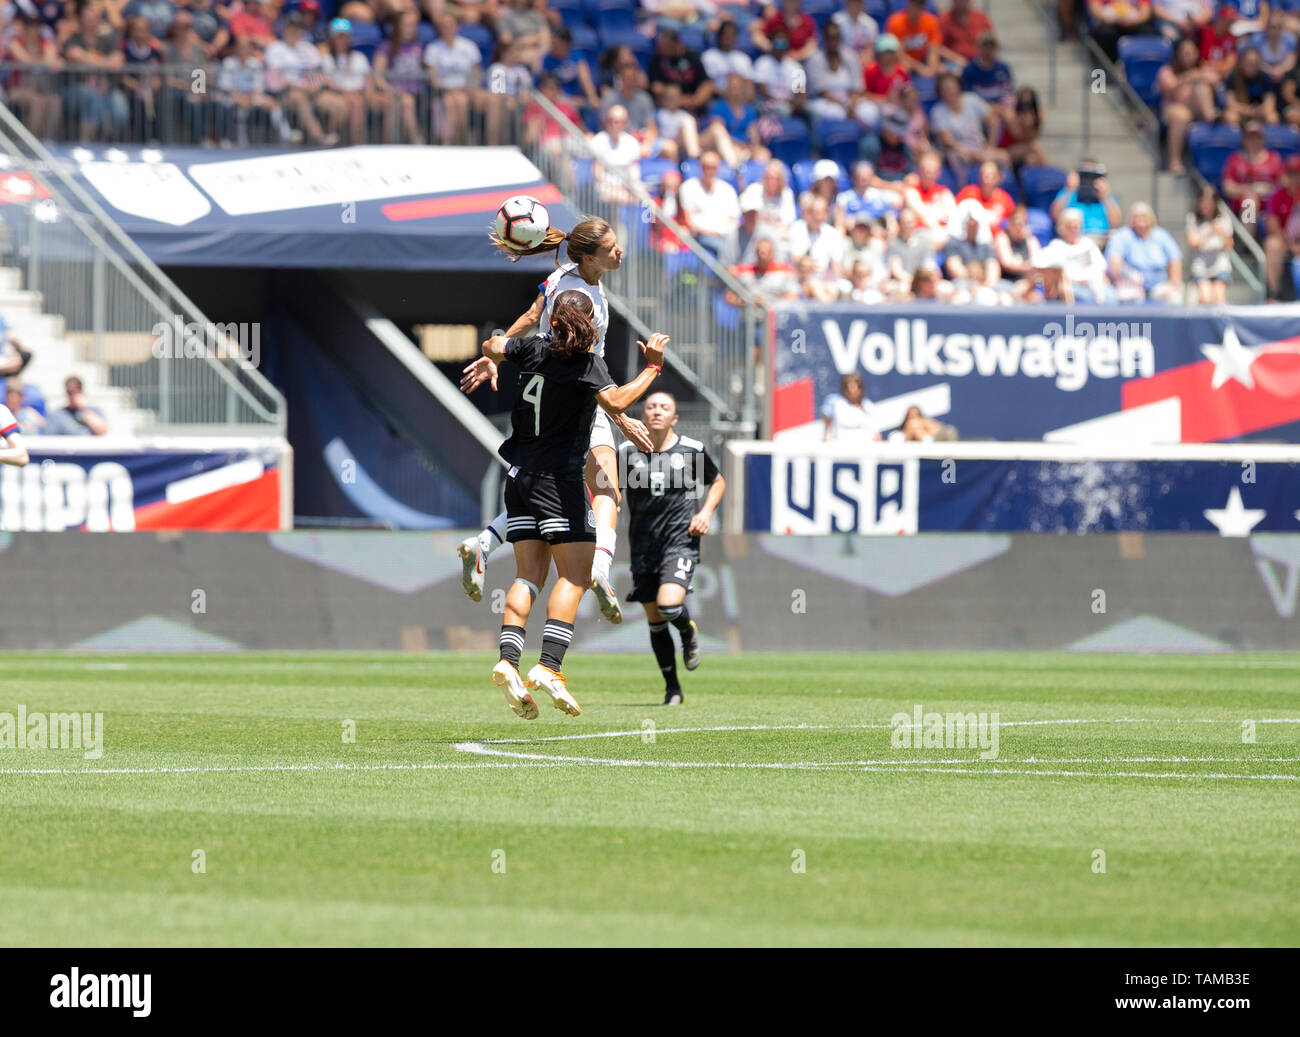 Harrison, NJ - May 26, 2019: Tobin Heath (17) of USA wons air ball during friendly game against Mexico as preparation for Womens World Cup on Red Bull Arena USA won 3 - 0 Stock Photo